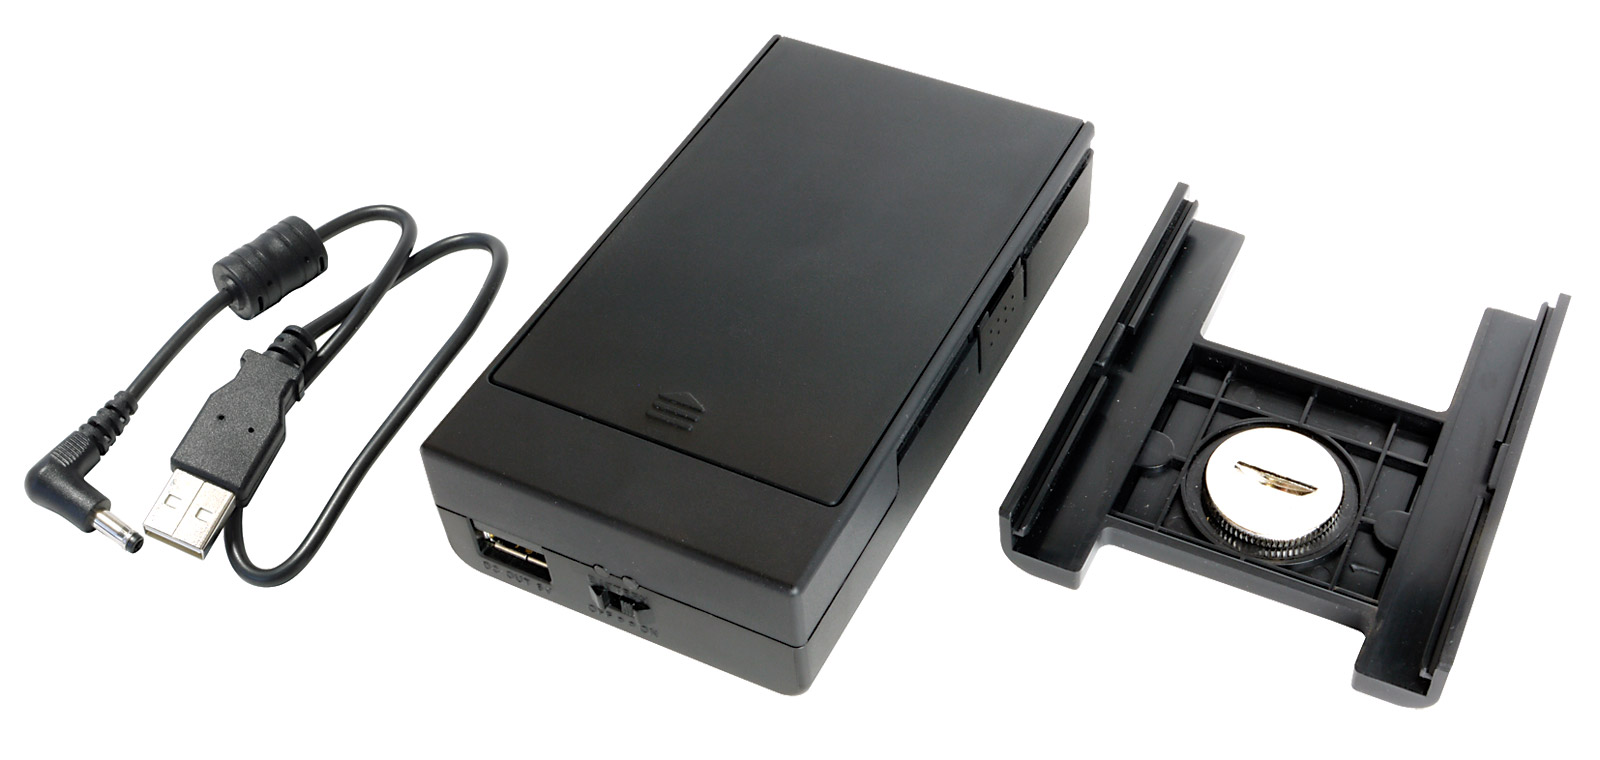 BP-6AA　DR-07　For　DR-05,　recorders　DR-40,　portable　BATTERY　EXTERNAL　TASCAM　MKII　PACK　DR-100,